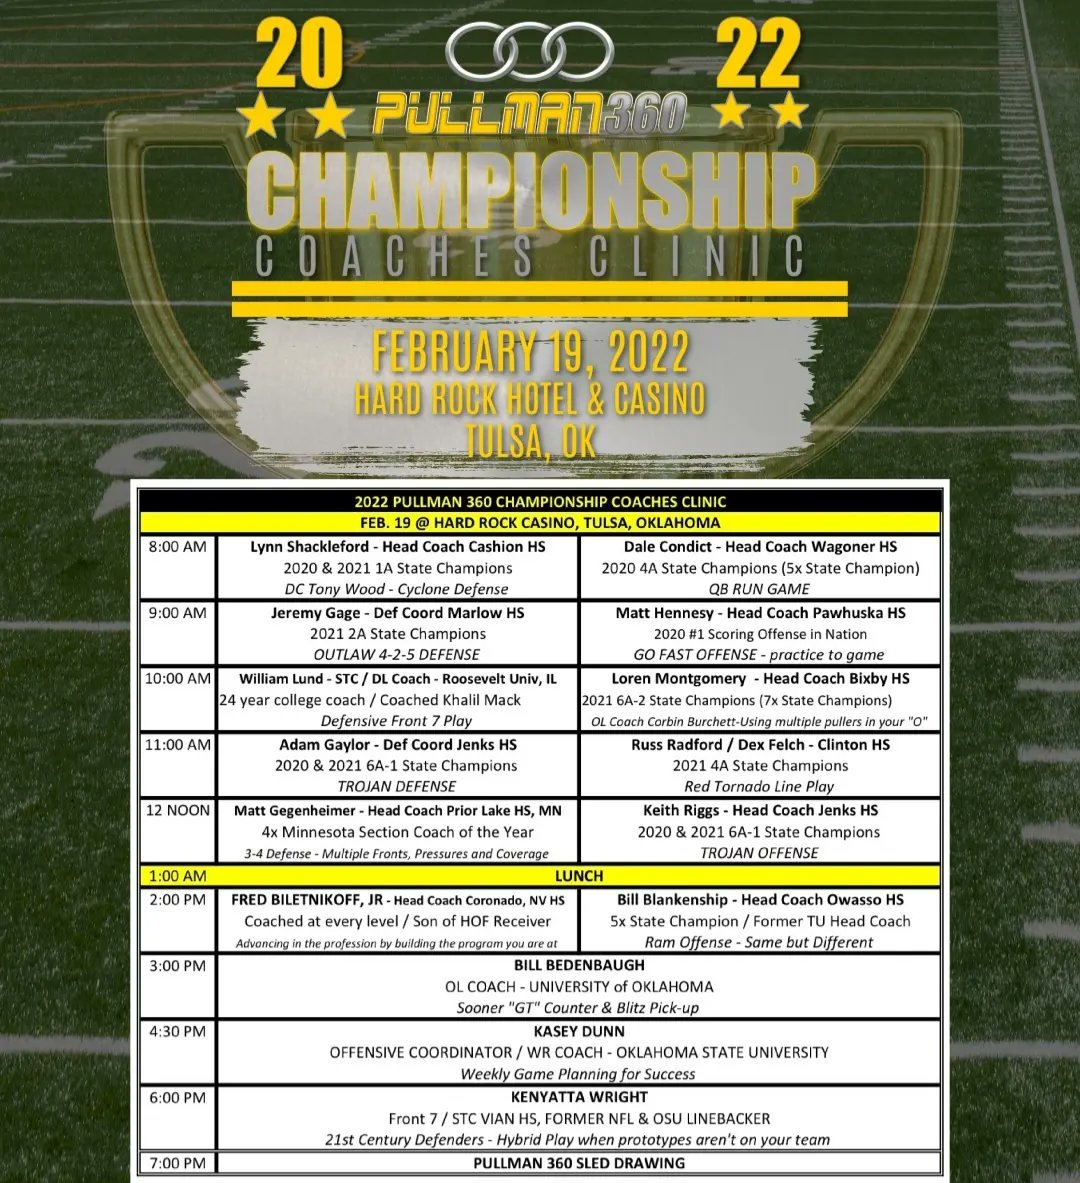 Gonna be a great clinic! Open to all coaches.... Youth to College. Info and contacts will be valuable for all levels! Get registered by Friday to double your entries in the drawings! **SHARE**